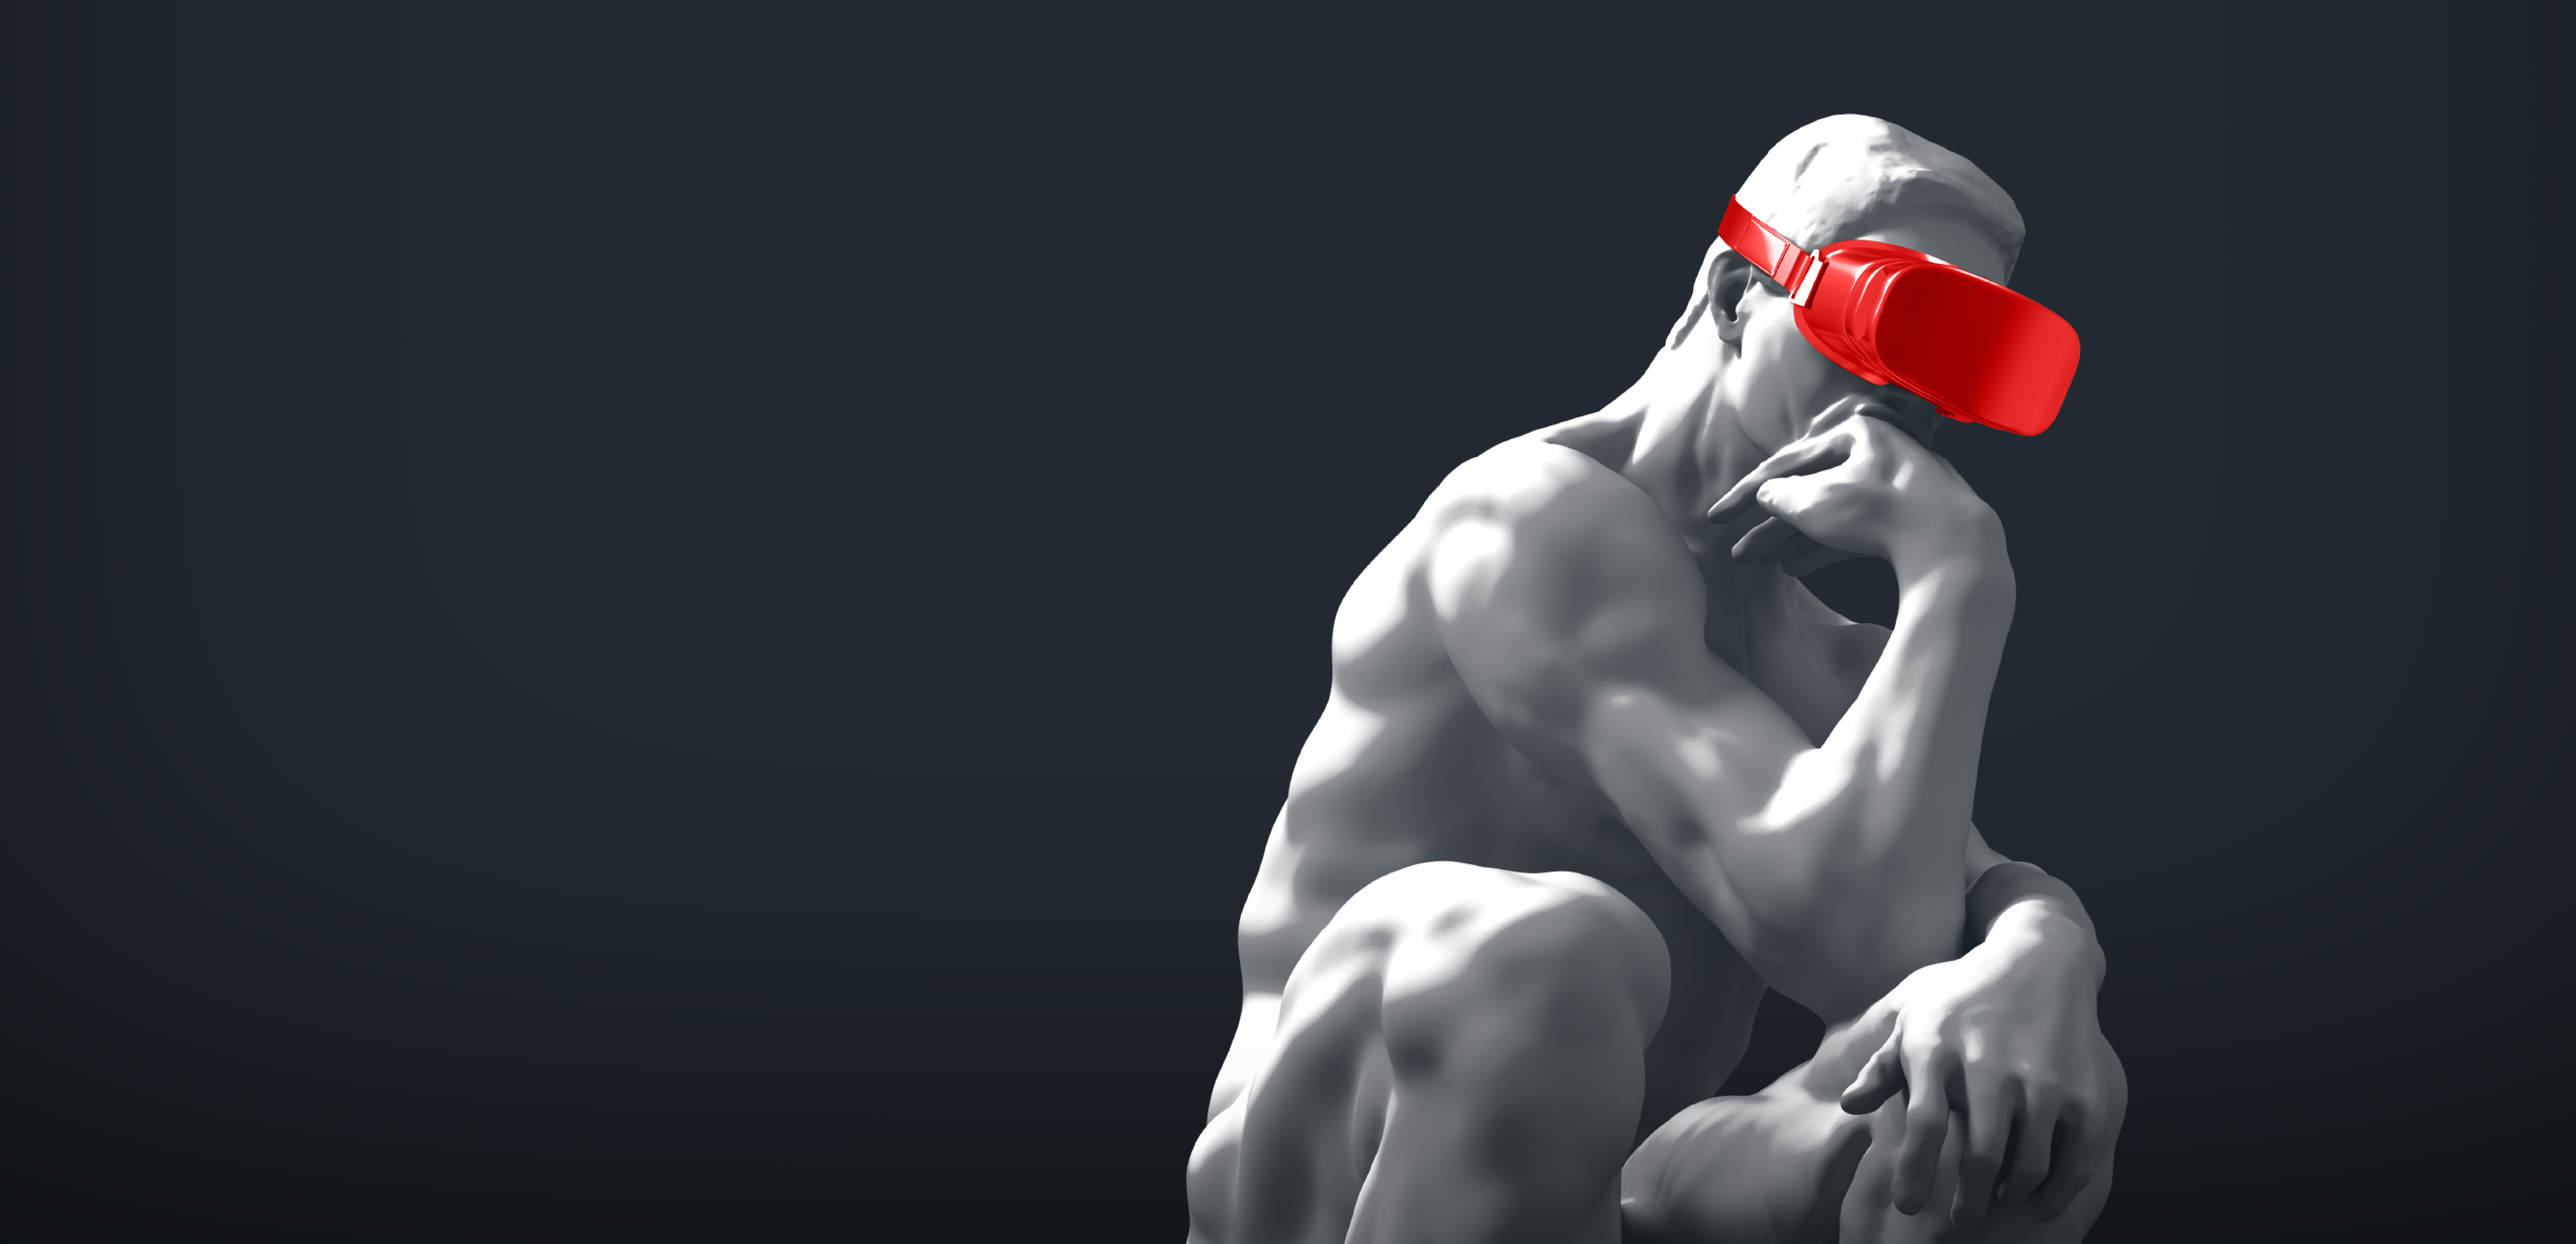 The thinker statue wearing red virtual reality goggles.